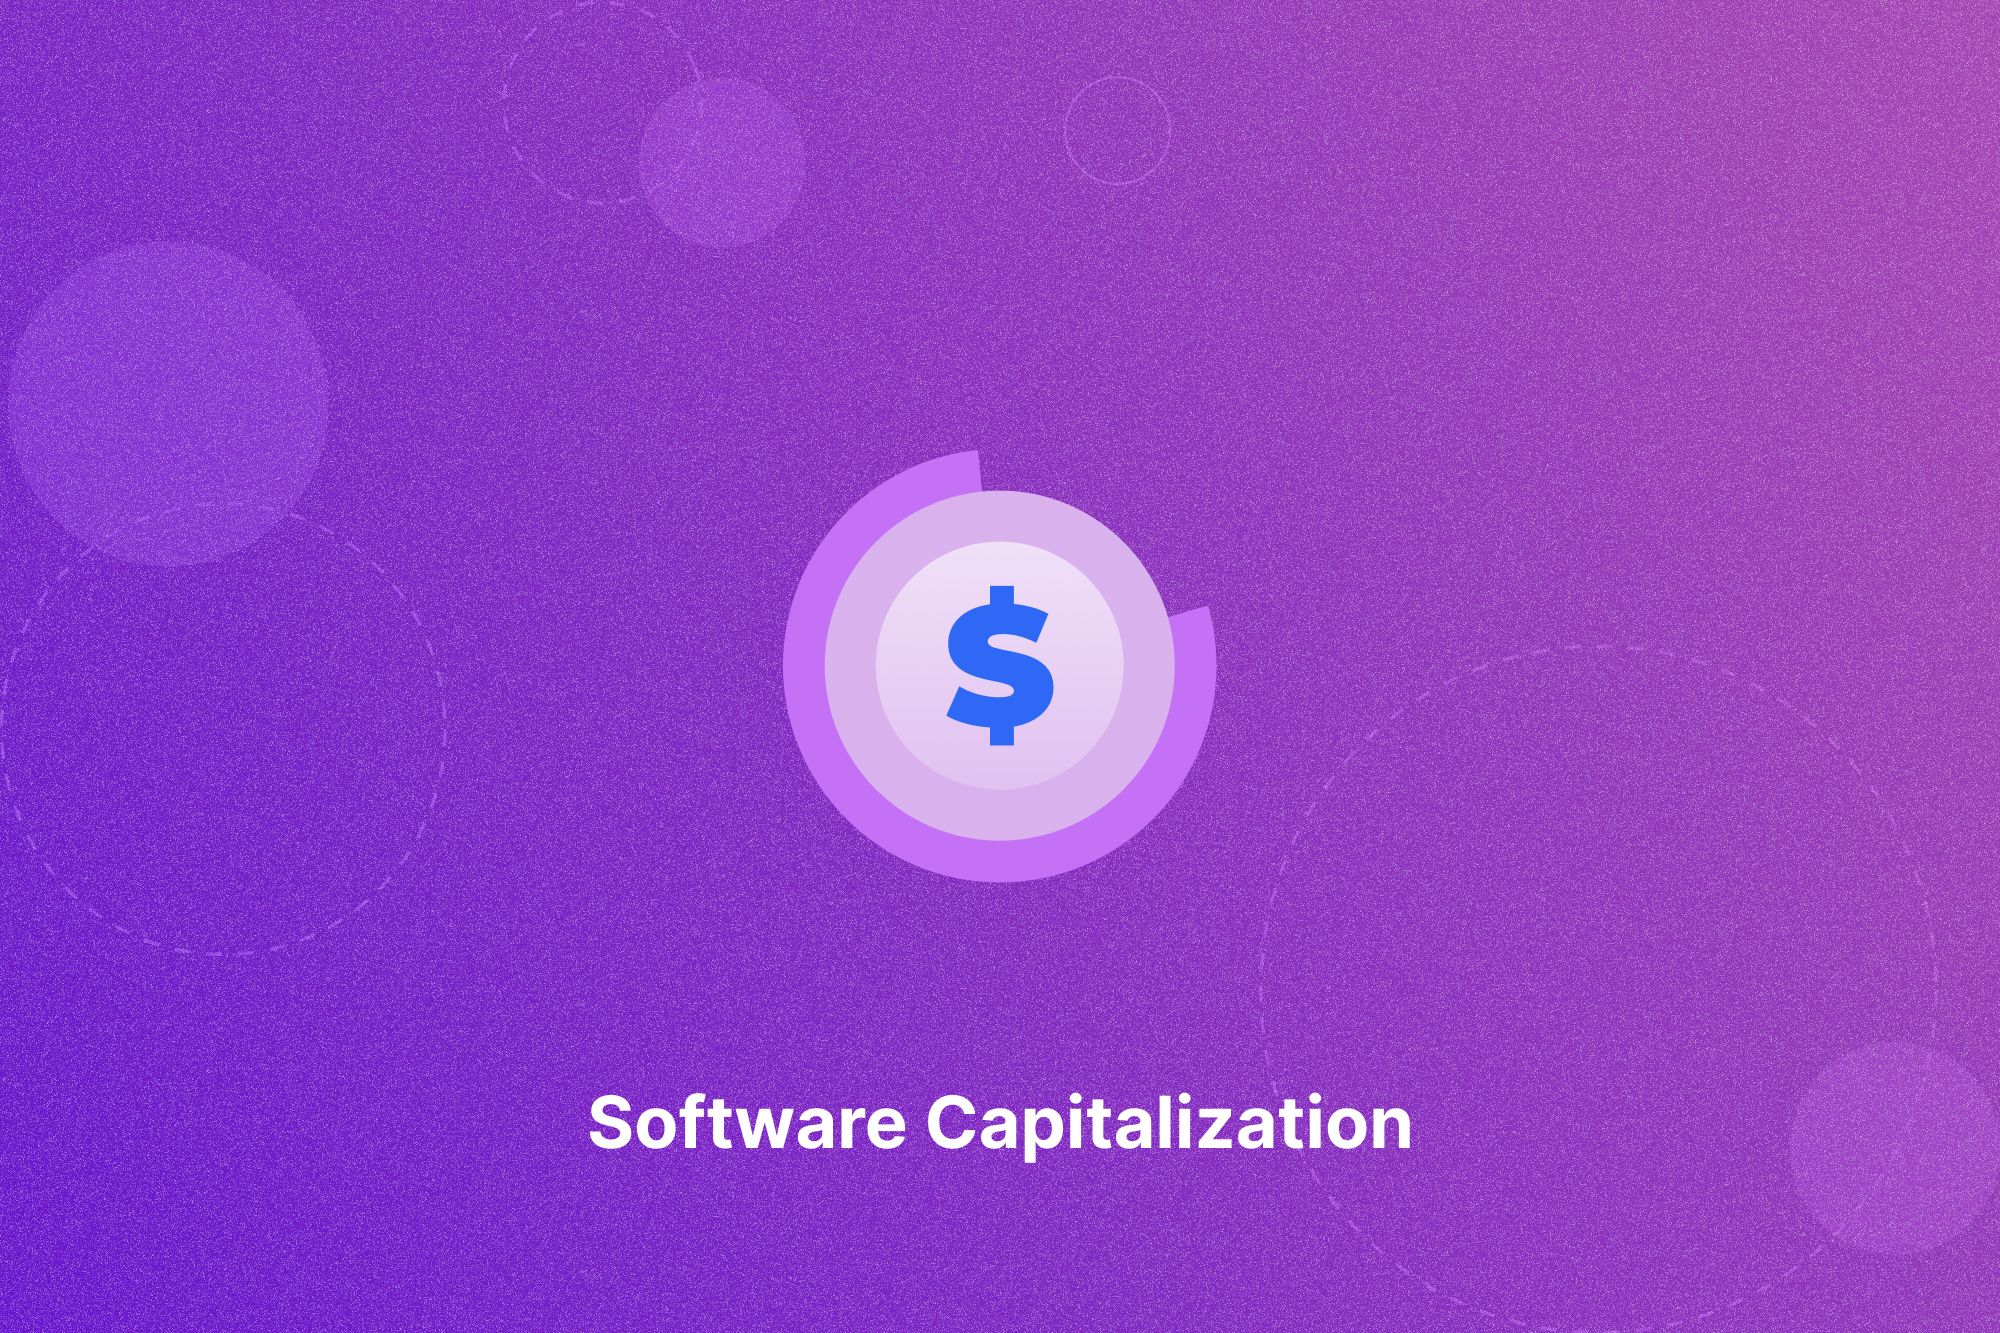 What is Software Capitalization?